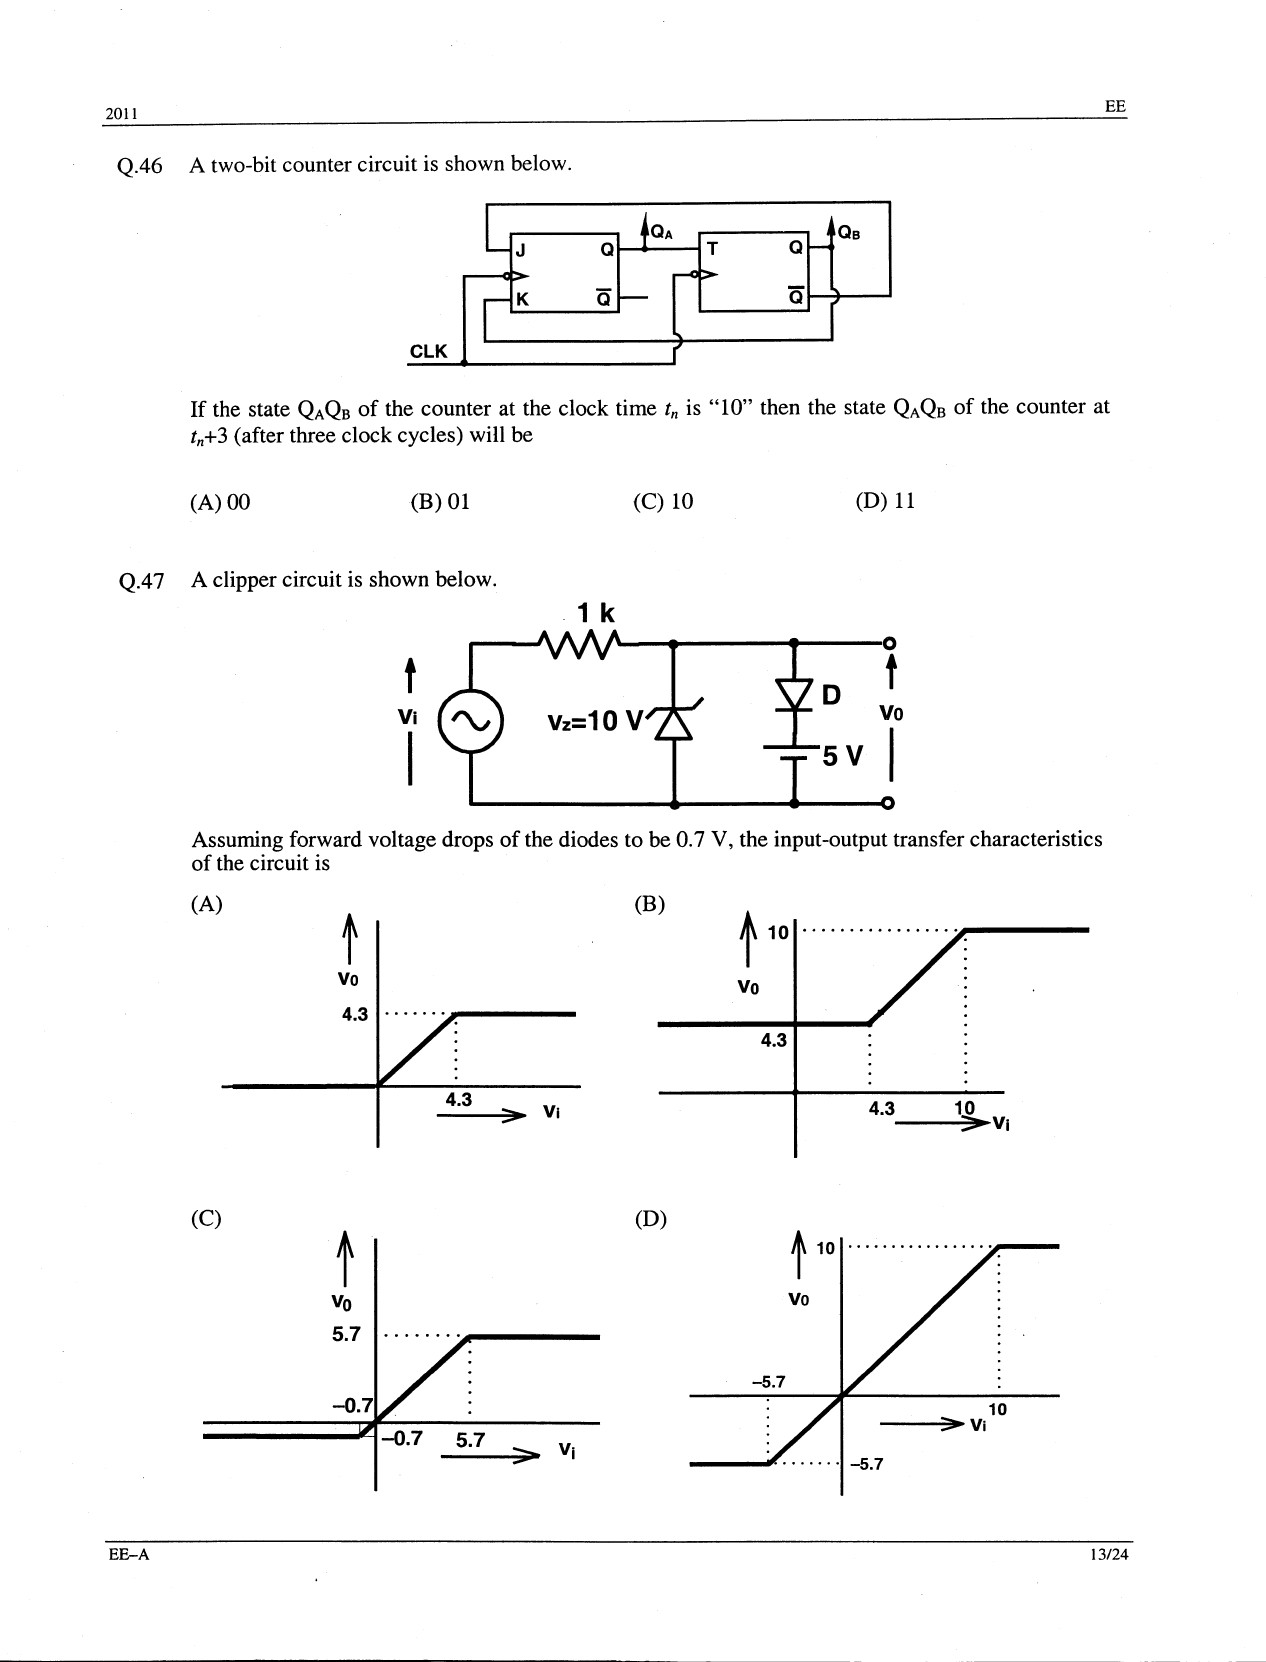 GATE Exam Question Paper 2011 Electrical Engineering 13